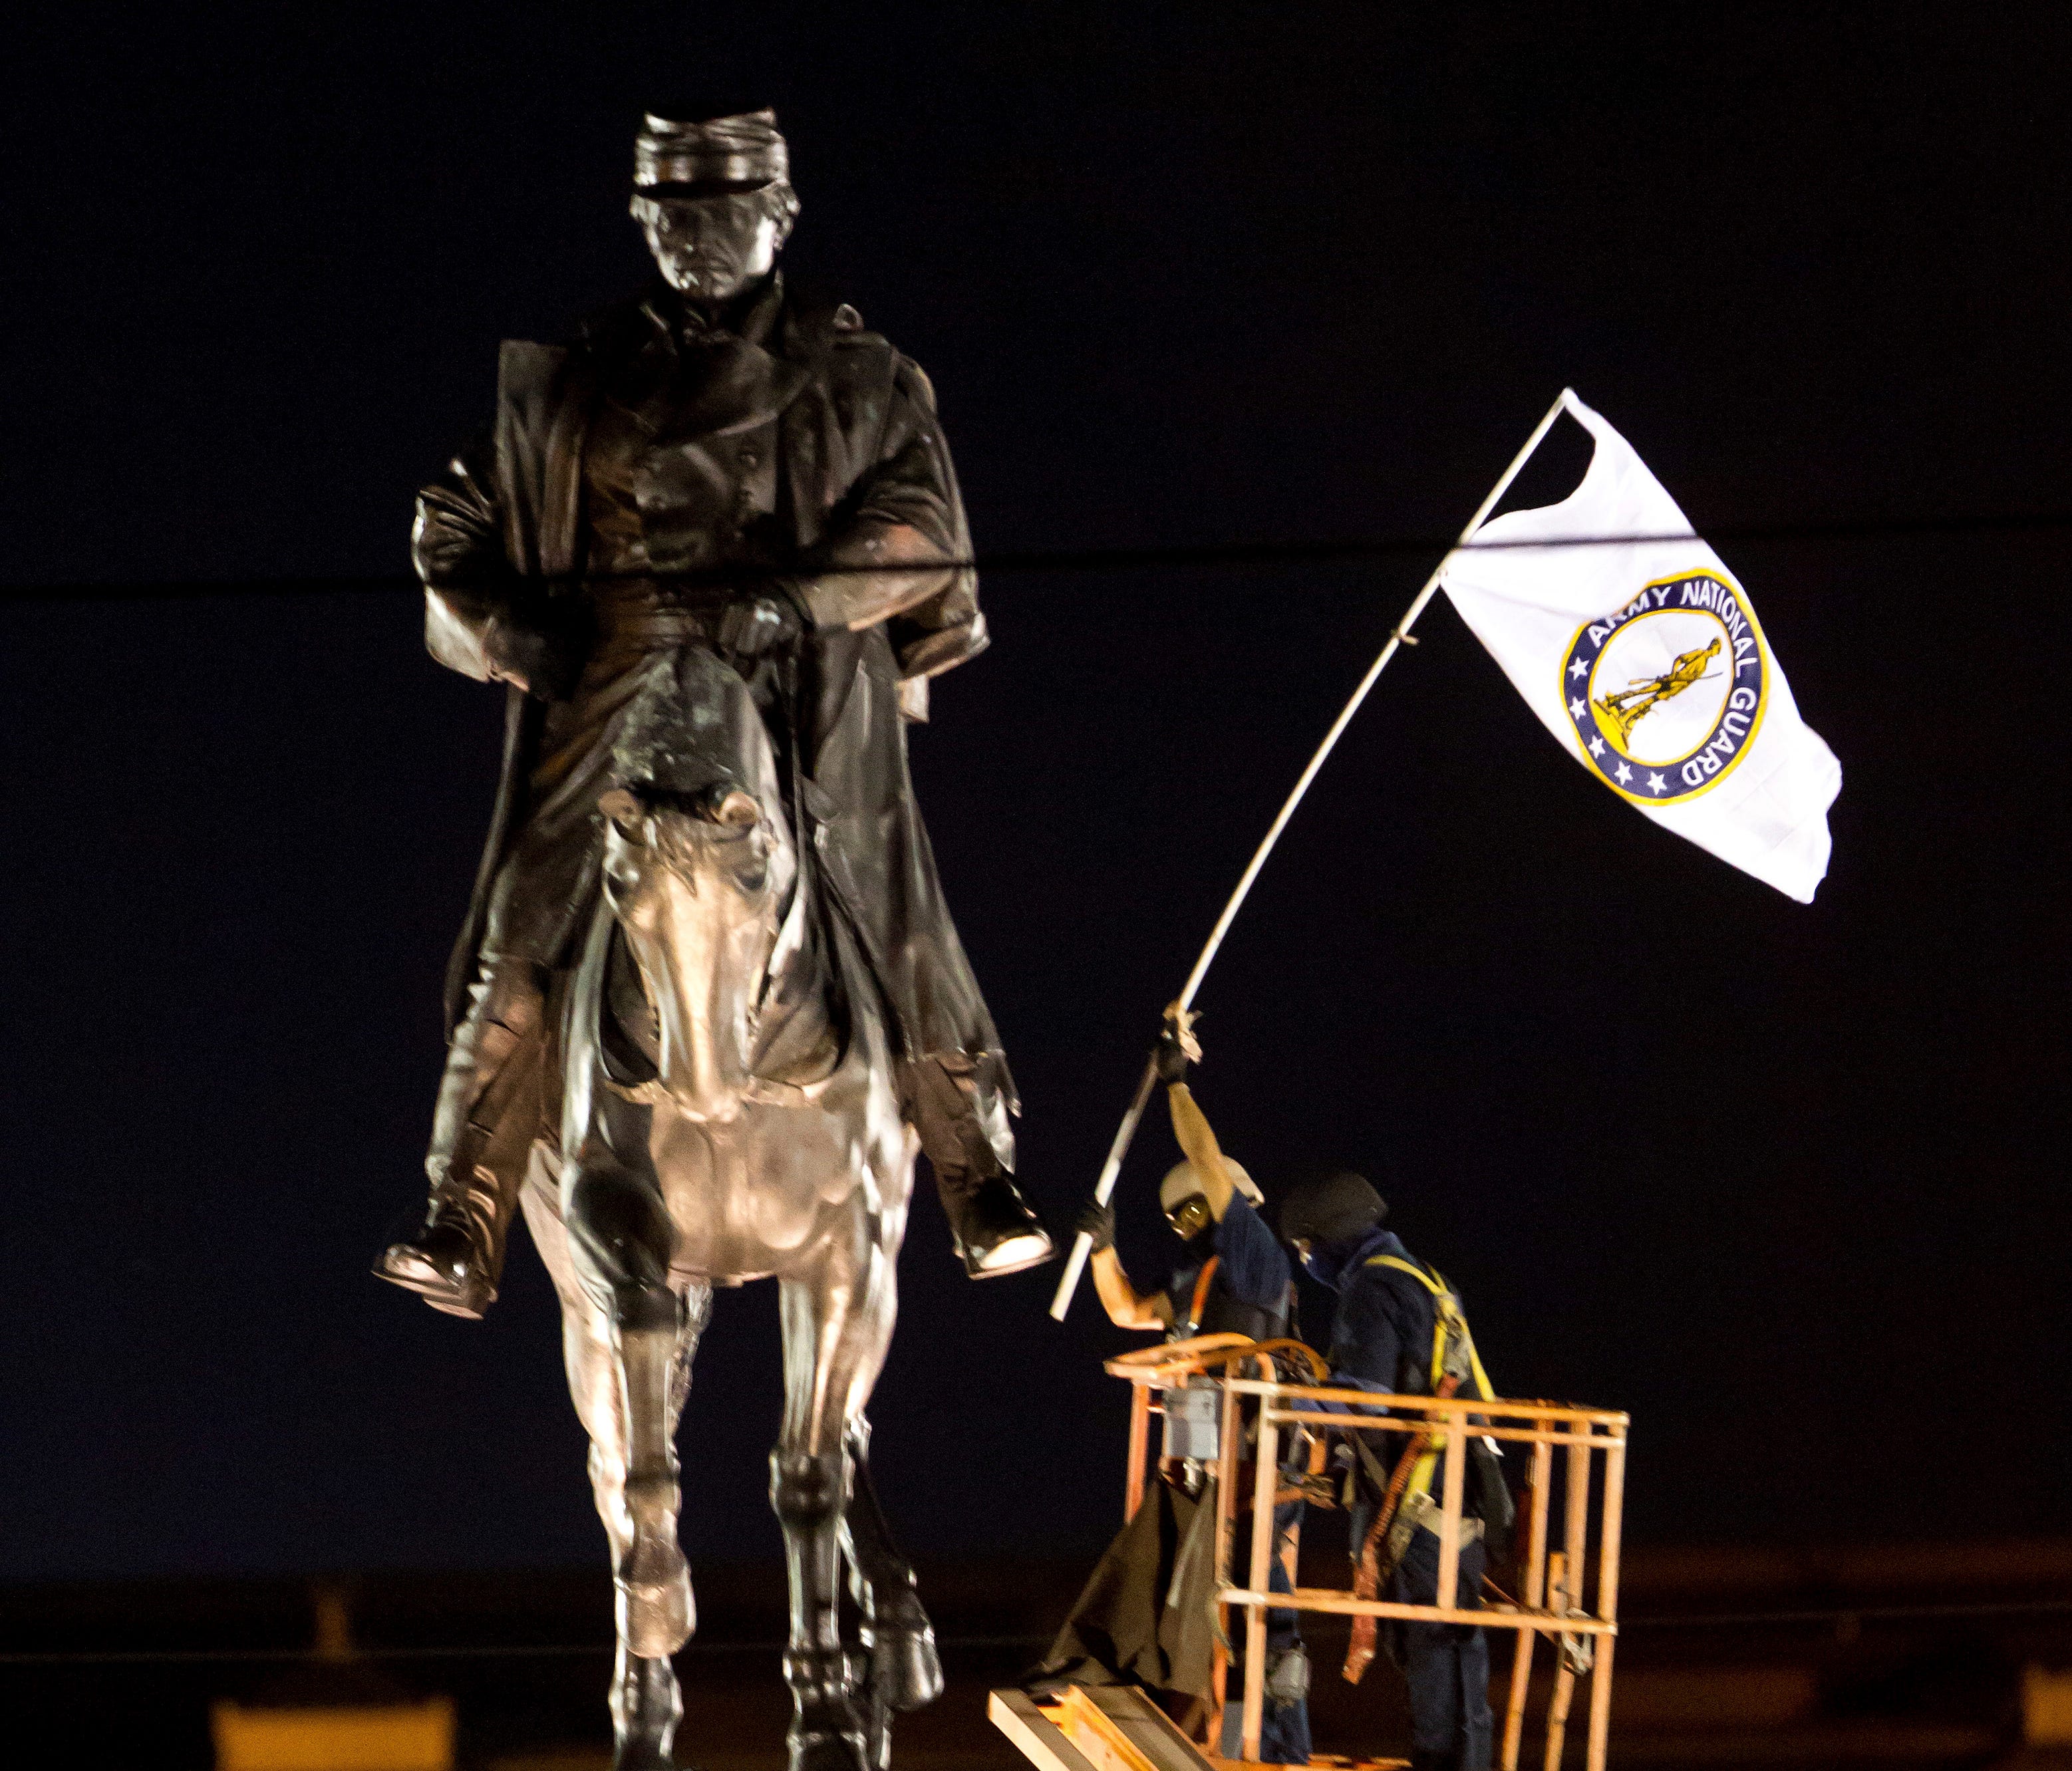 A worker in protective gear takes down an Army National Guard flag from the statue of Confederate General P.G.T. Beauregard during the statue's removal from the entrance to City Park in New Orleans, Tuesday, May 16, 2017.